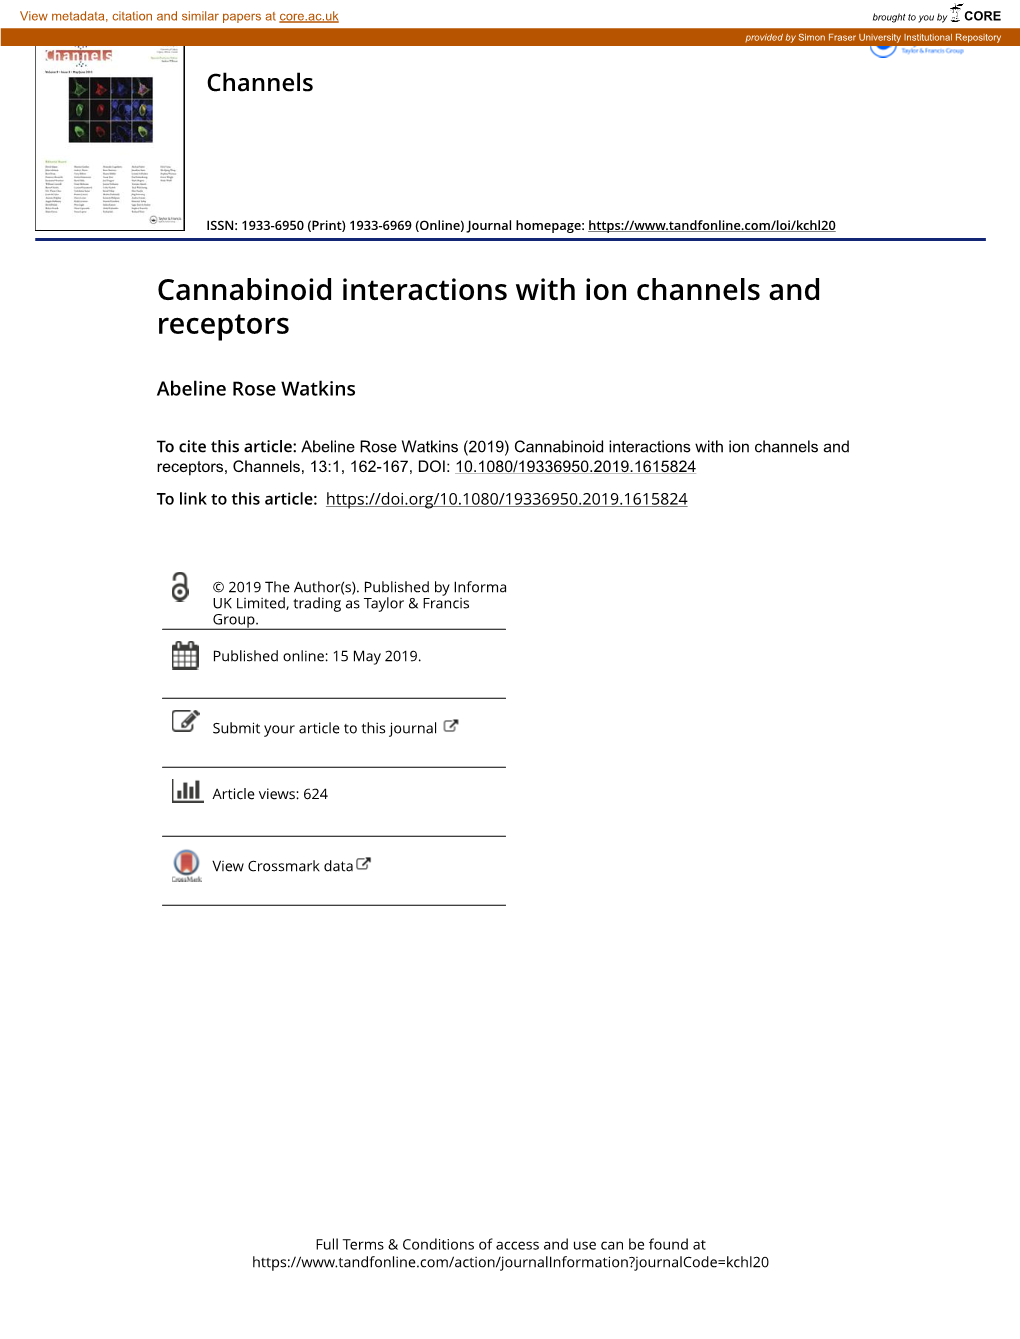 Cannabinoid Interactions with Ion Channels and Receptors